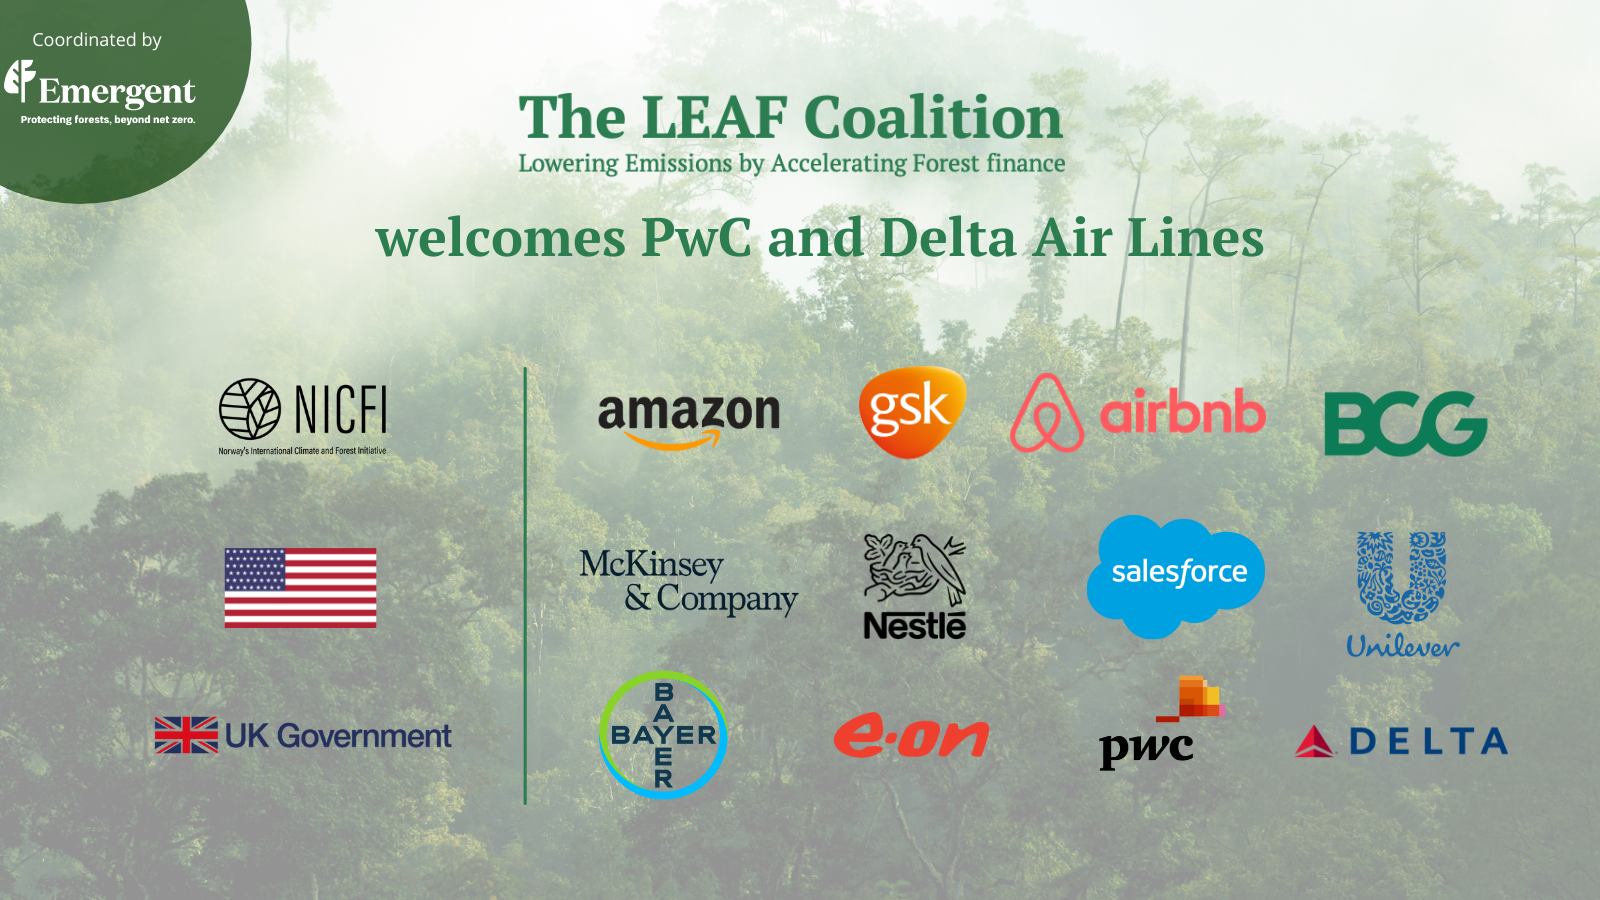 Delta Air Lines and PwC join the LEAF Coalition